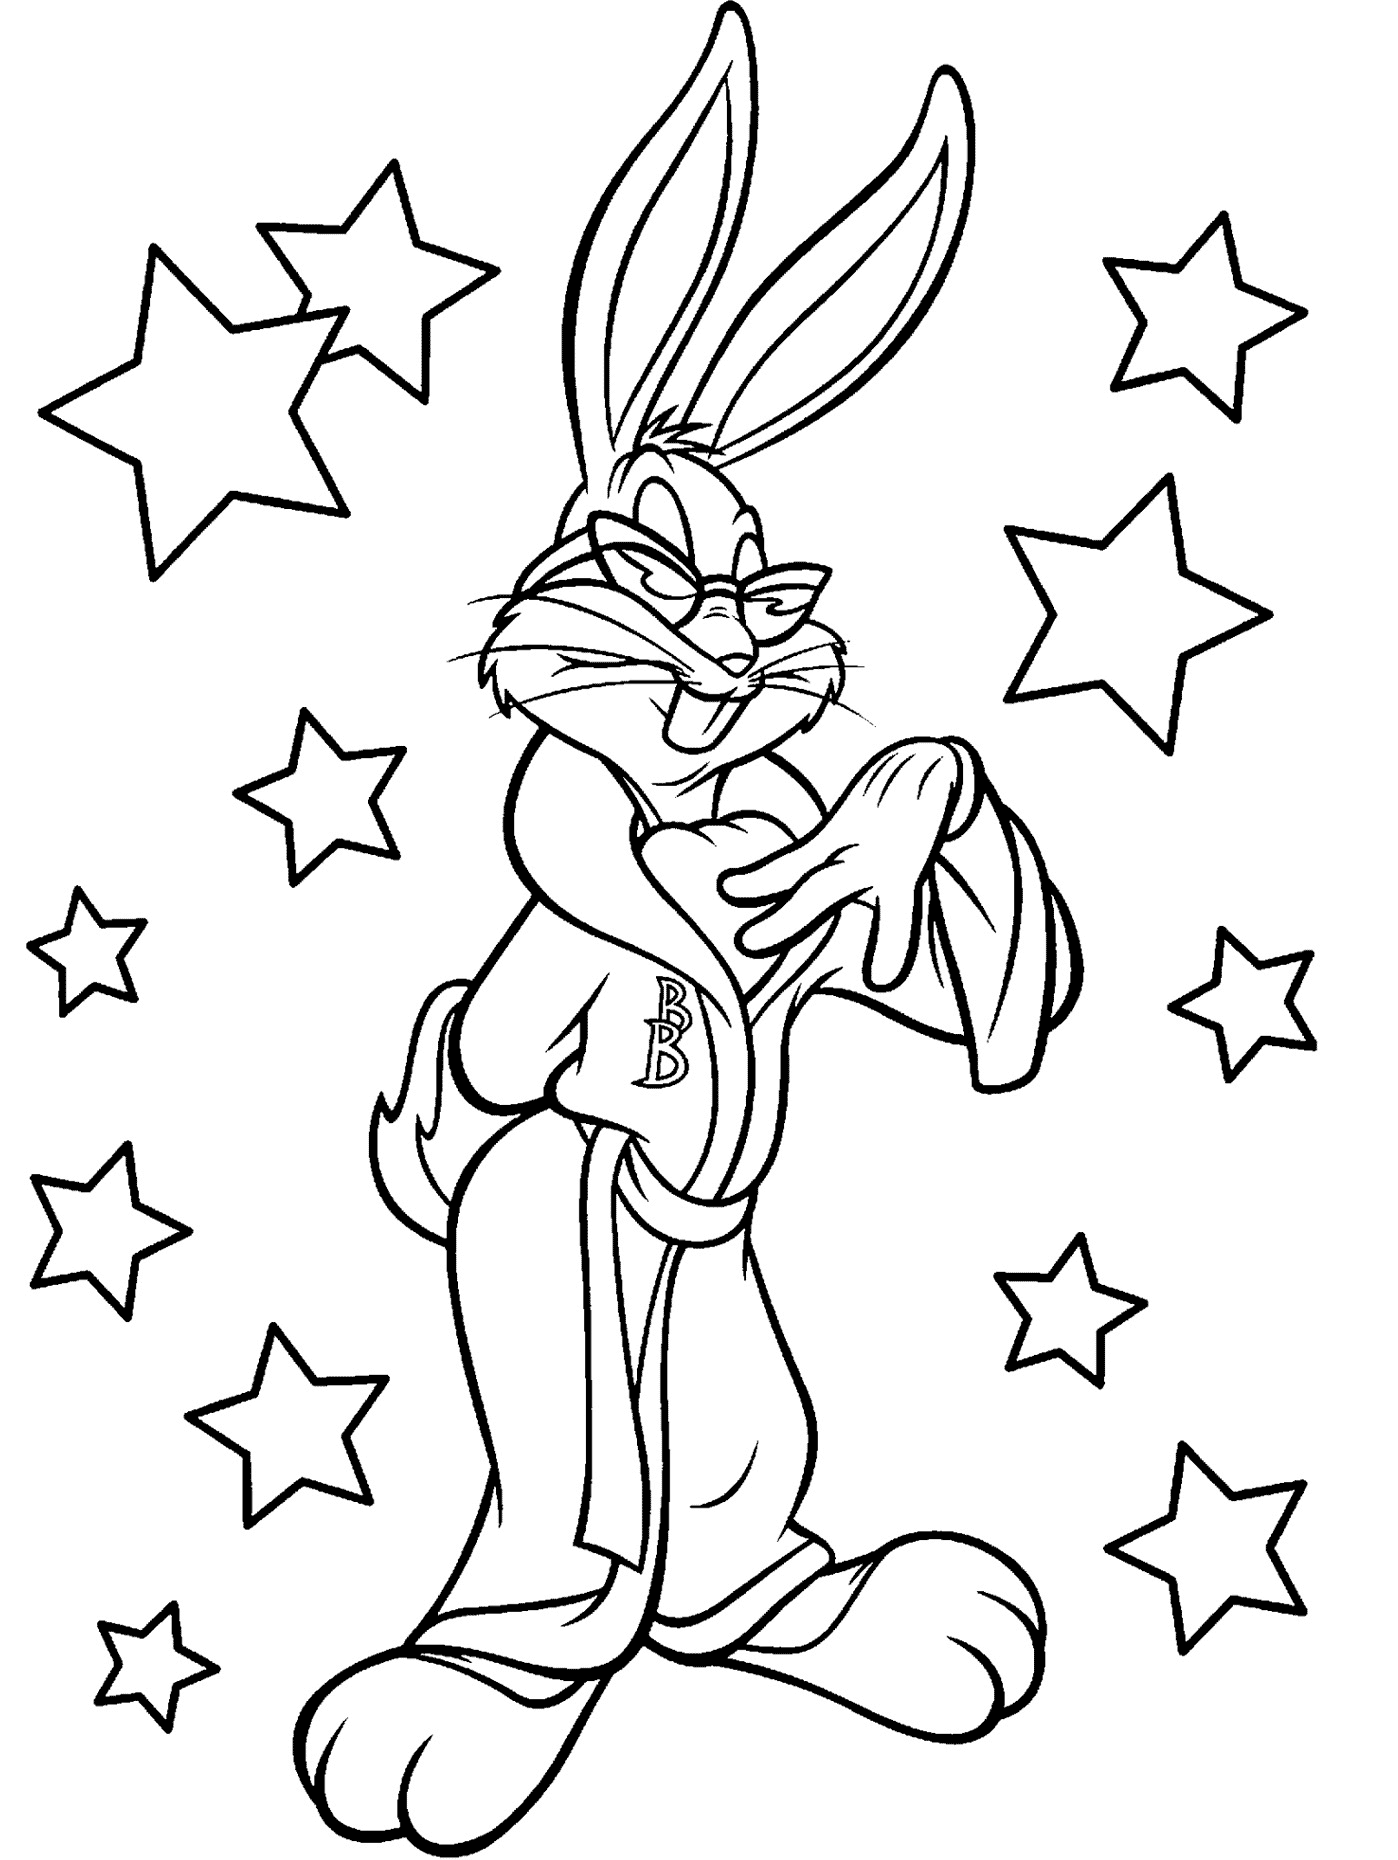 Bugs Bunny In Sunglasses Coloring Pages